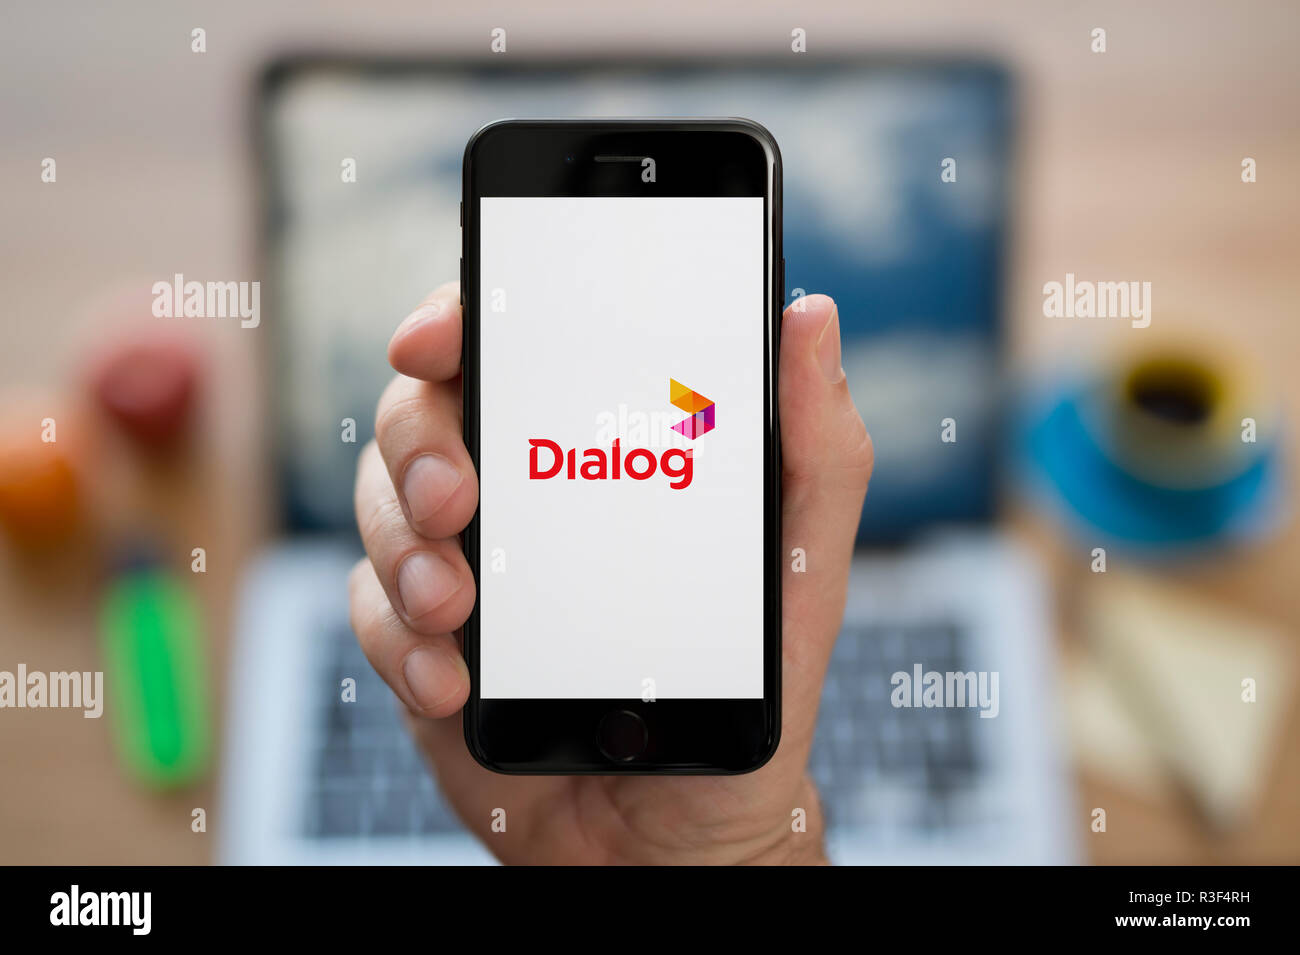 A man looks at his iPhone which displays the Dialog logo, while sat at his computer desk (Editorial use only). Stock Photo